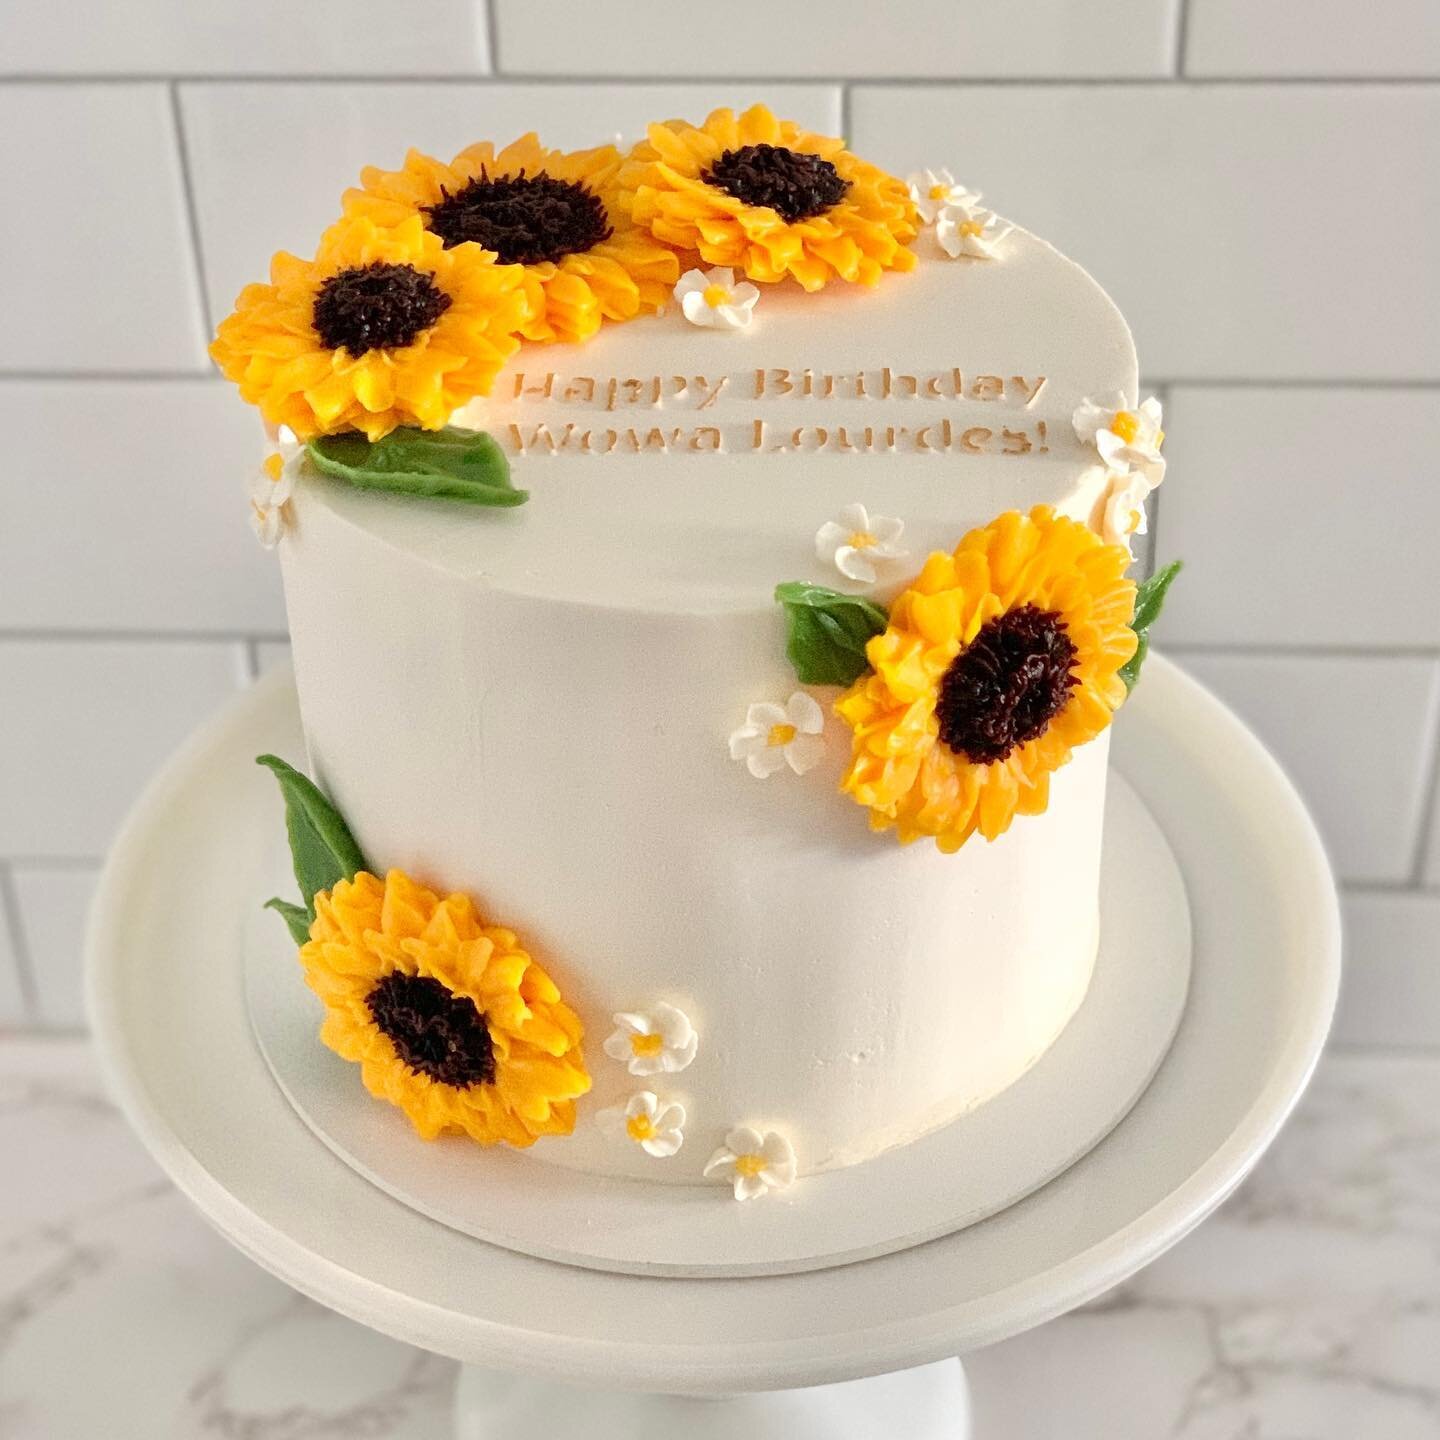 A summery cake for a summery February! Chocolate cake, coffee buttercream, and handmade buttercream flowers 🌻